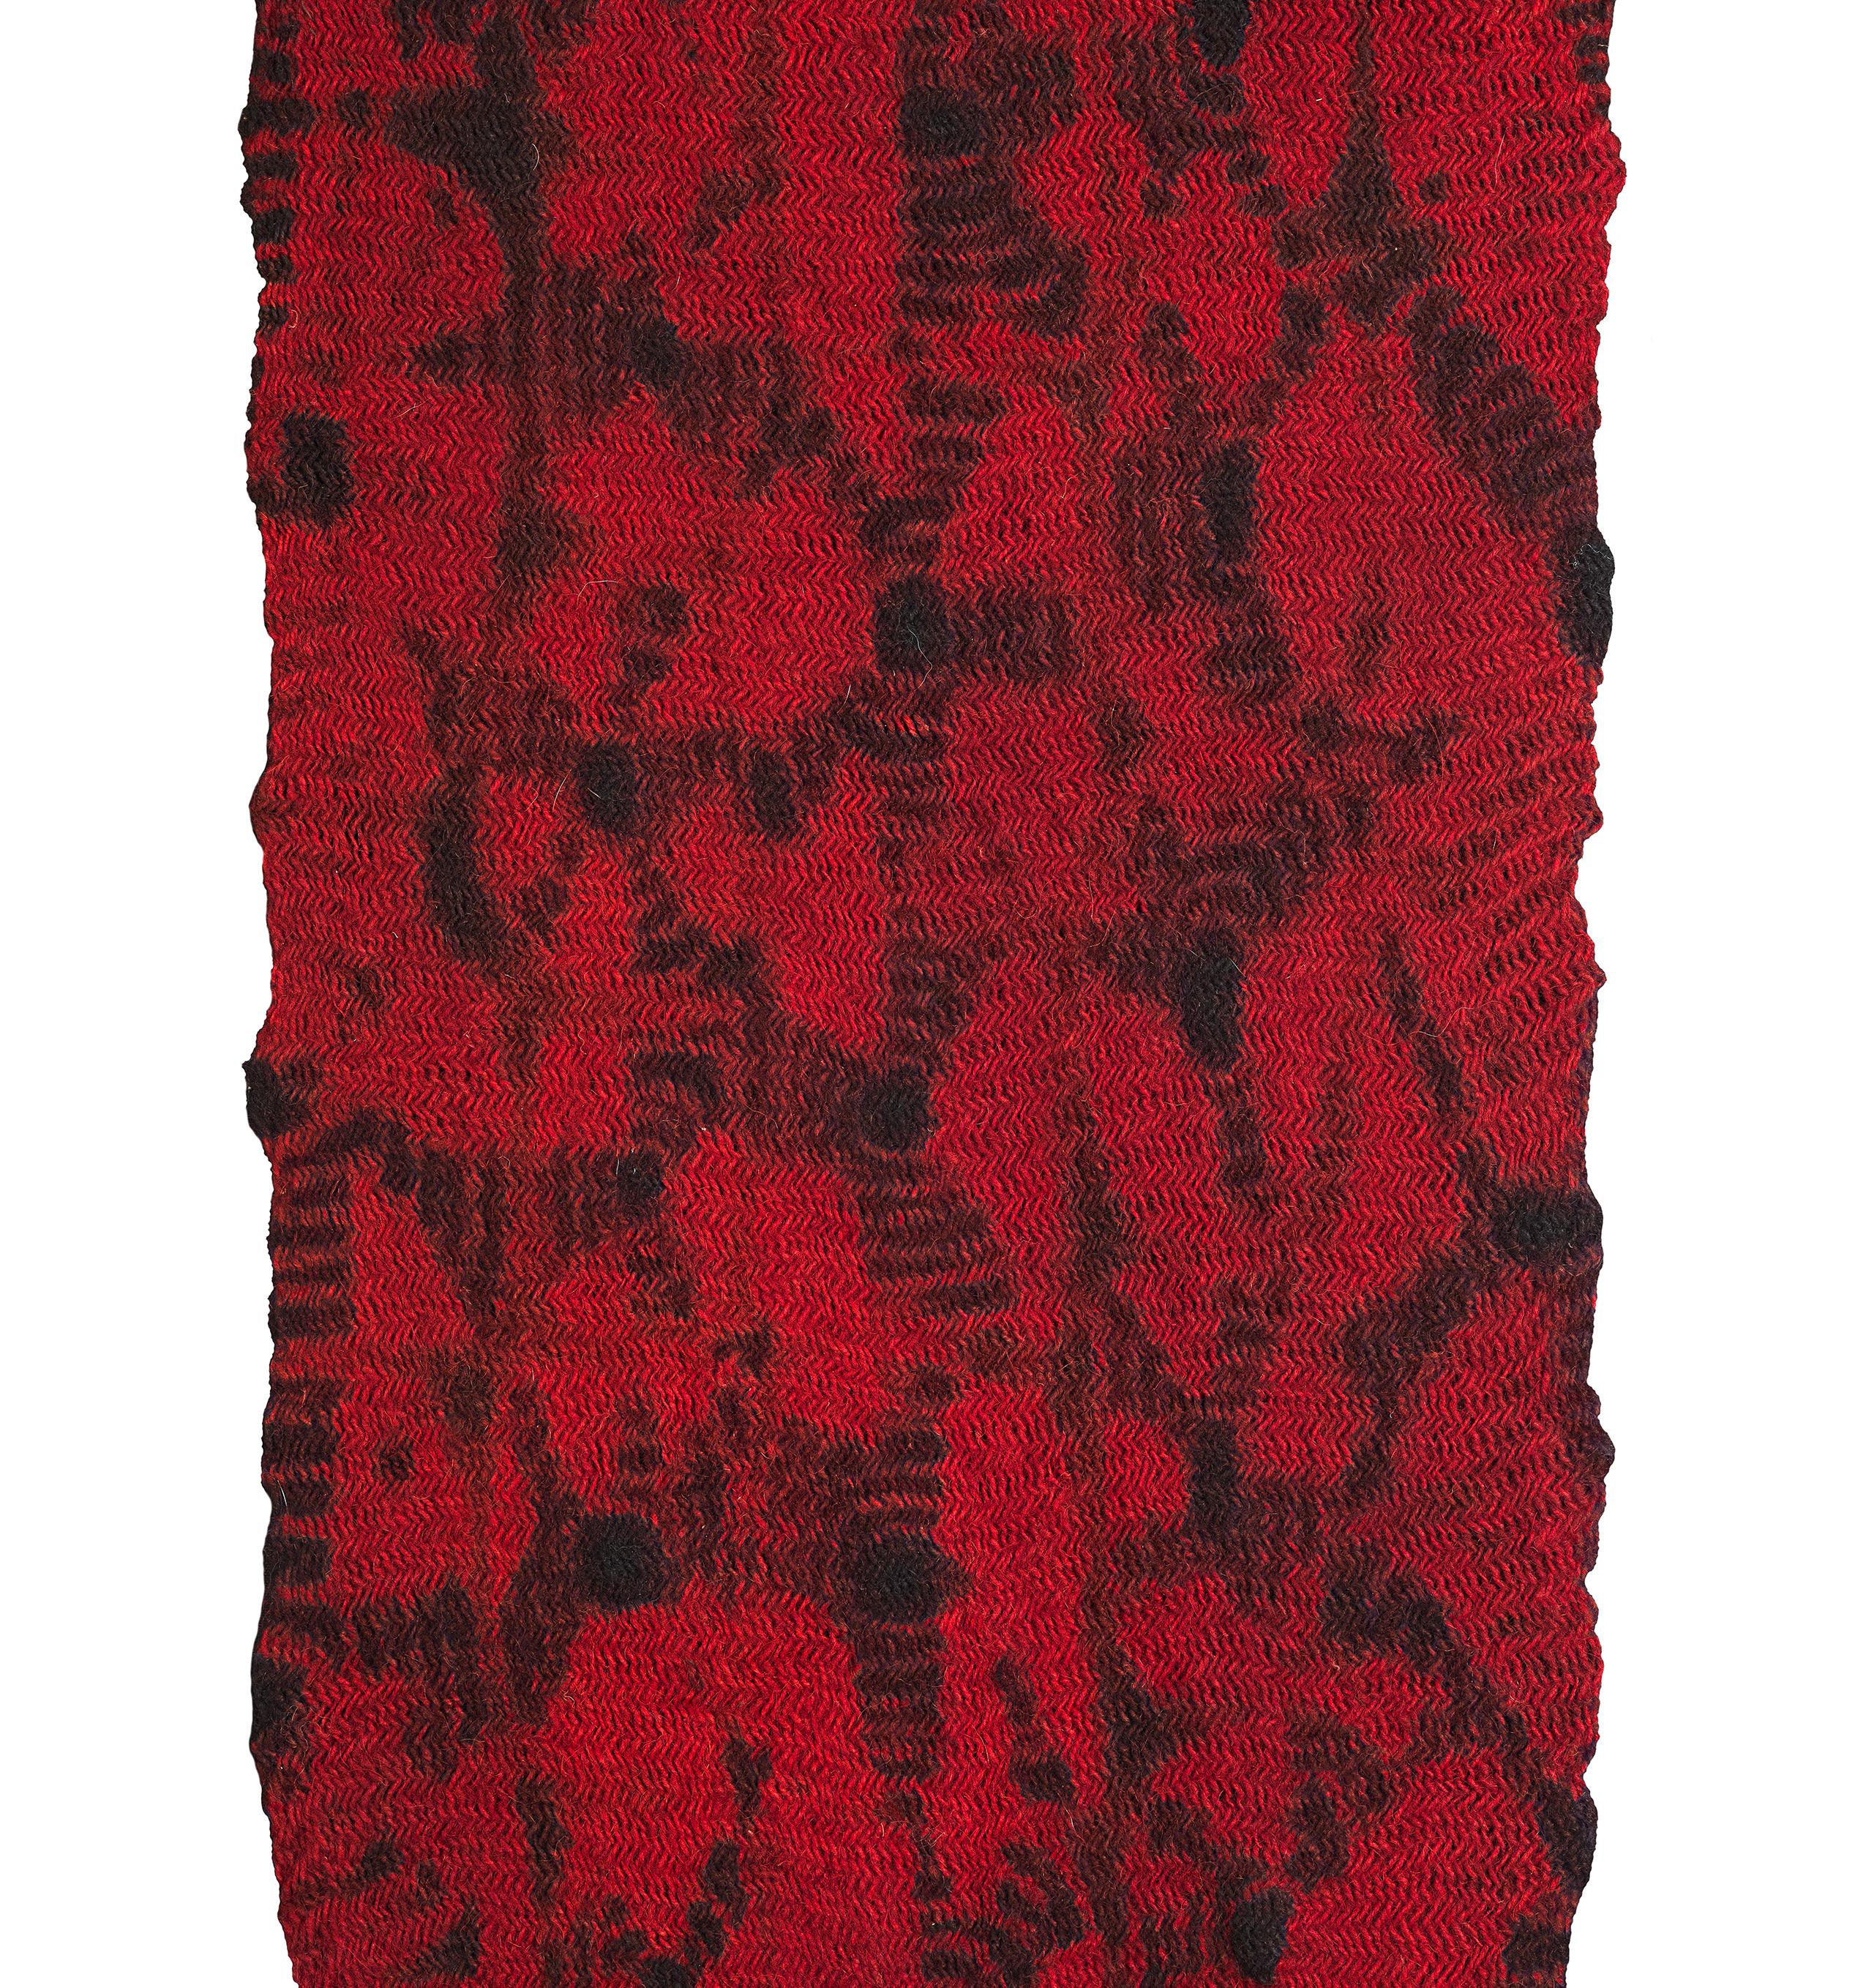 Woman’s Head Wrapper,  Assaba
Berber people, Matmata, Dahar Mountains, Tunisia
1900-1950
Wool, natural dyes , Sprang technique, shaped resist dyeing
69 x 15 inches  175 x 38
A very large example with complex patterning